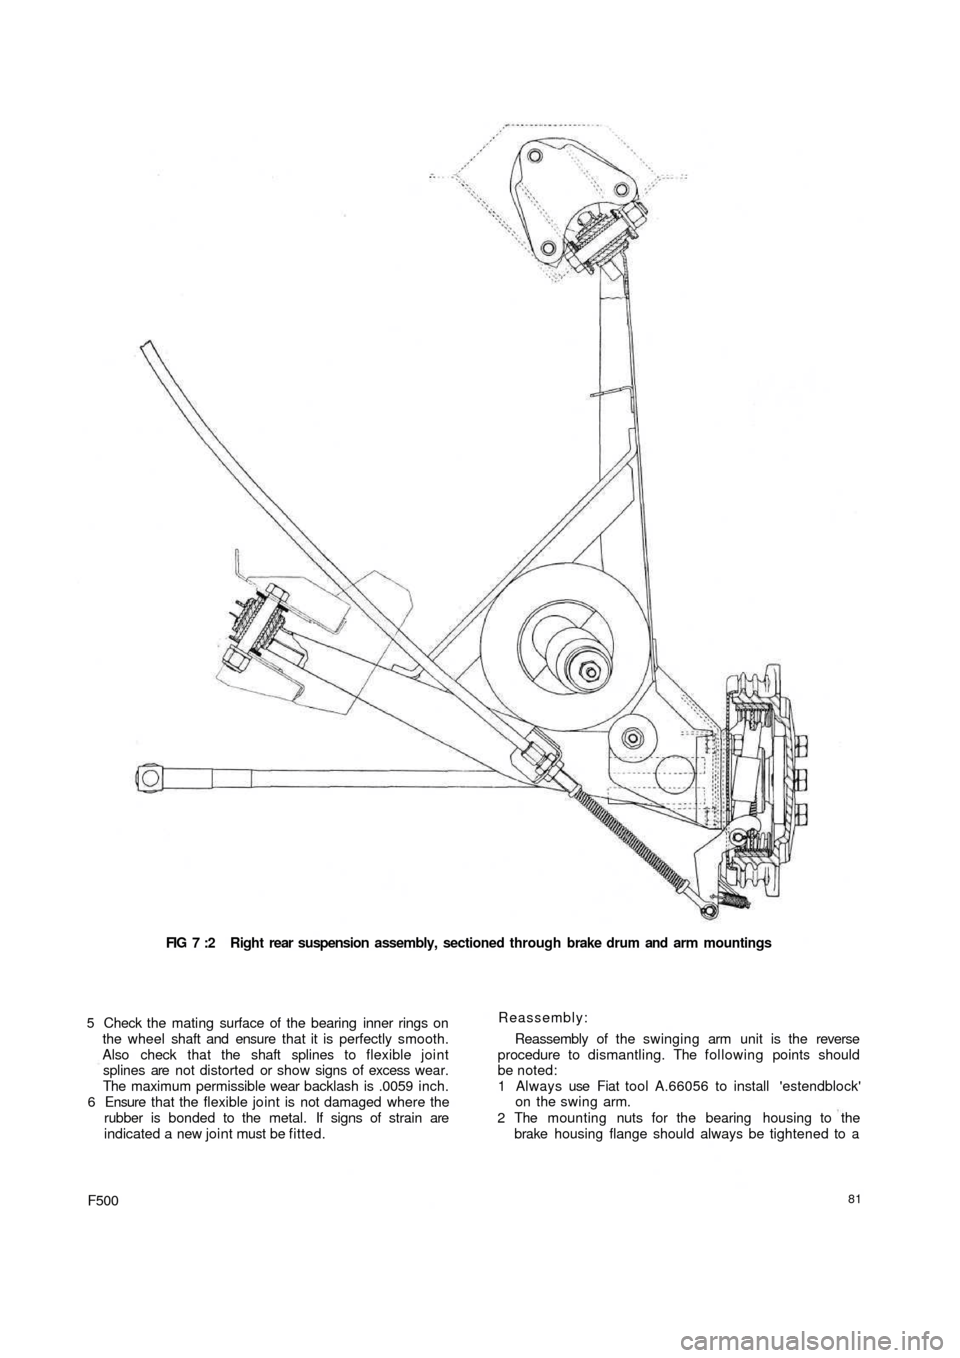 FIAT 500 1970 1.G Workshop Manual FIG 7 :2  Right rear suspension  assembly, sectioned through brake drum and arm mountings
5 Check the mating surface of the bearing inner rings on
the wheel shaft and ensure that it is perfectly smoot